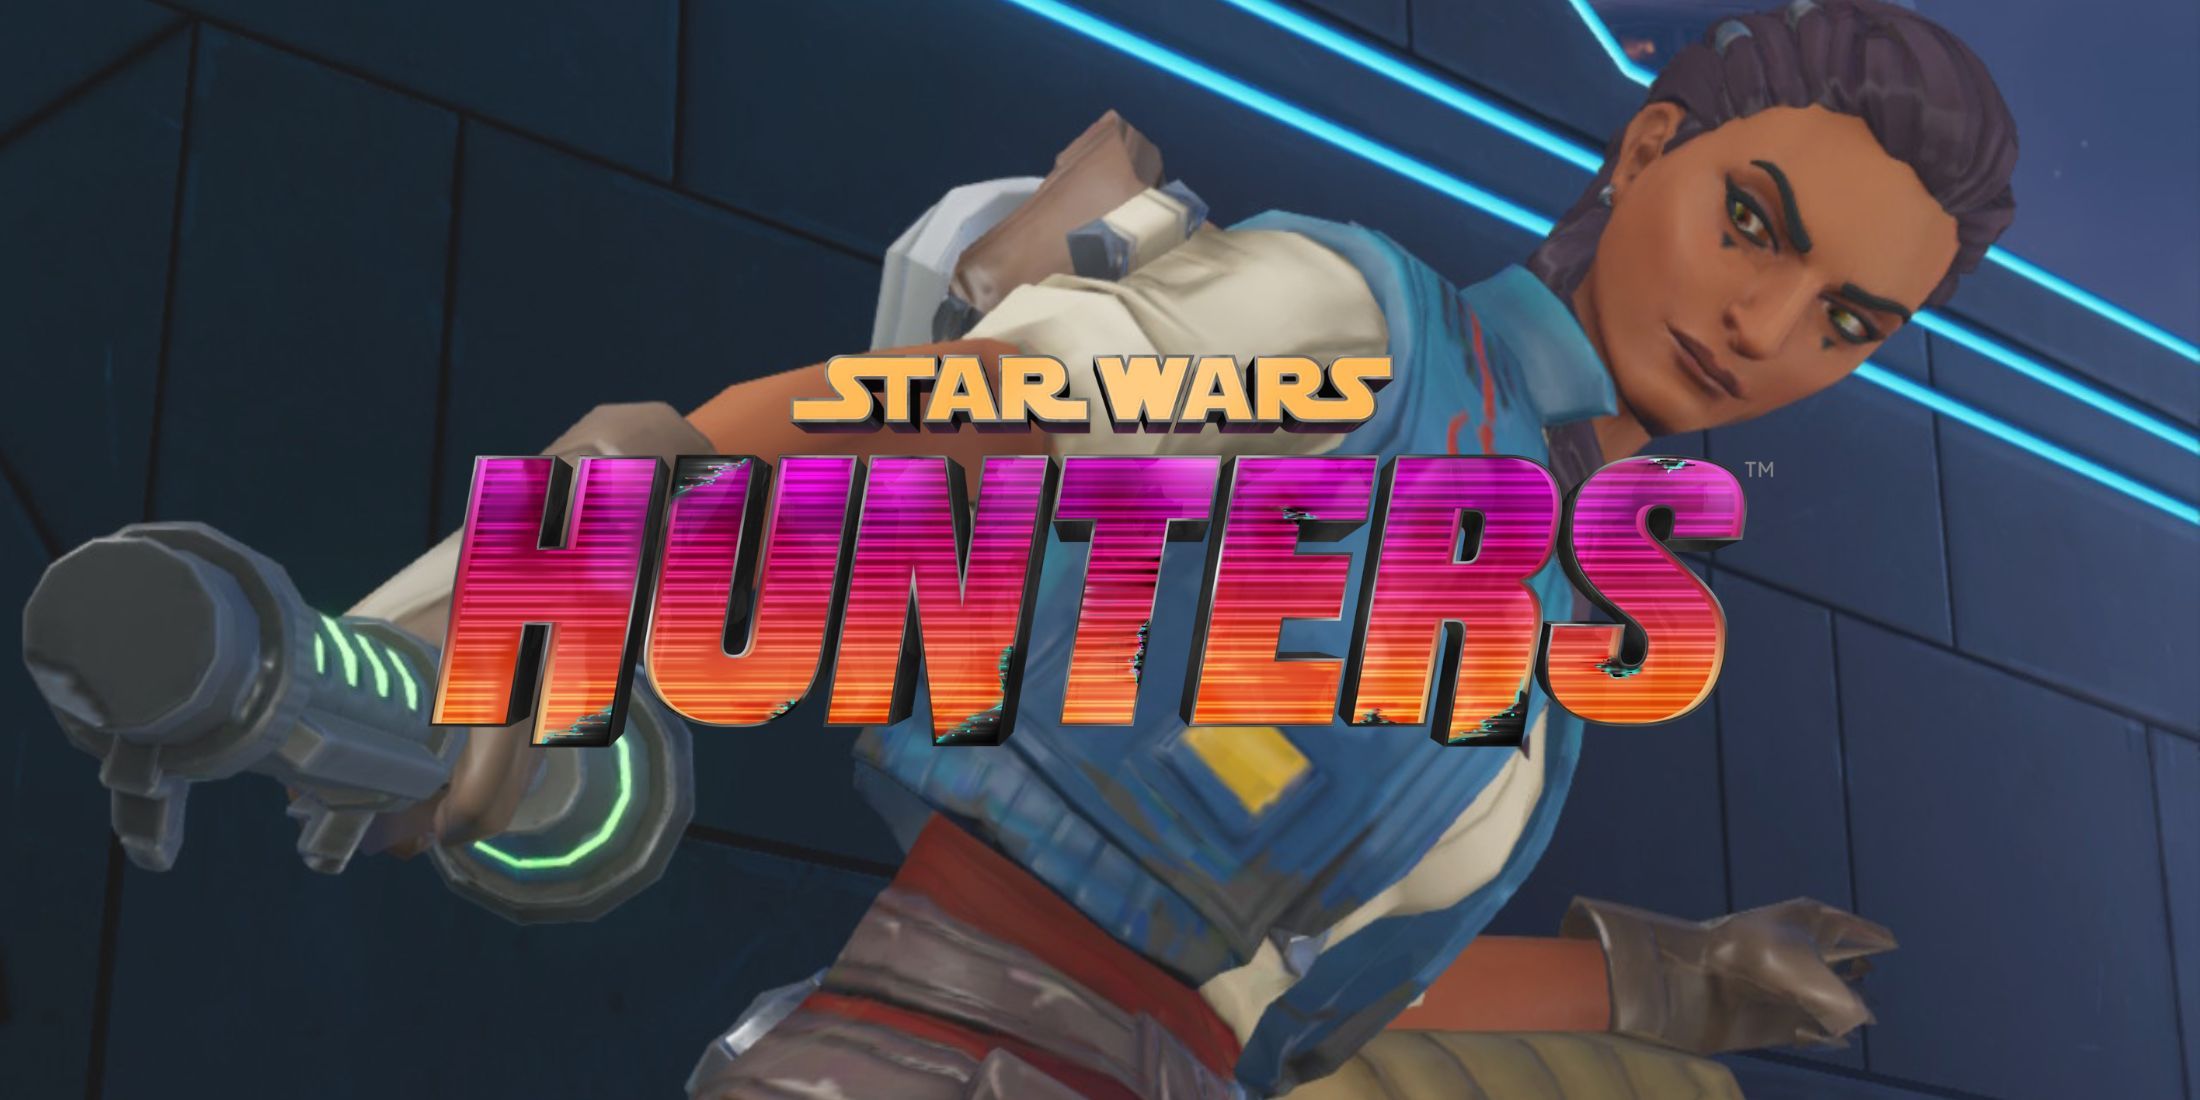 Zaina from Star Wars Hunters with the game logo in the forefront